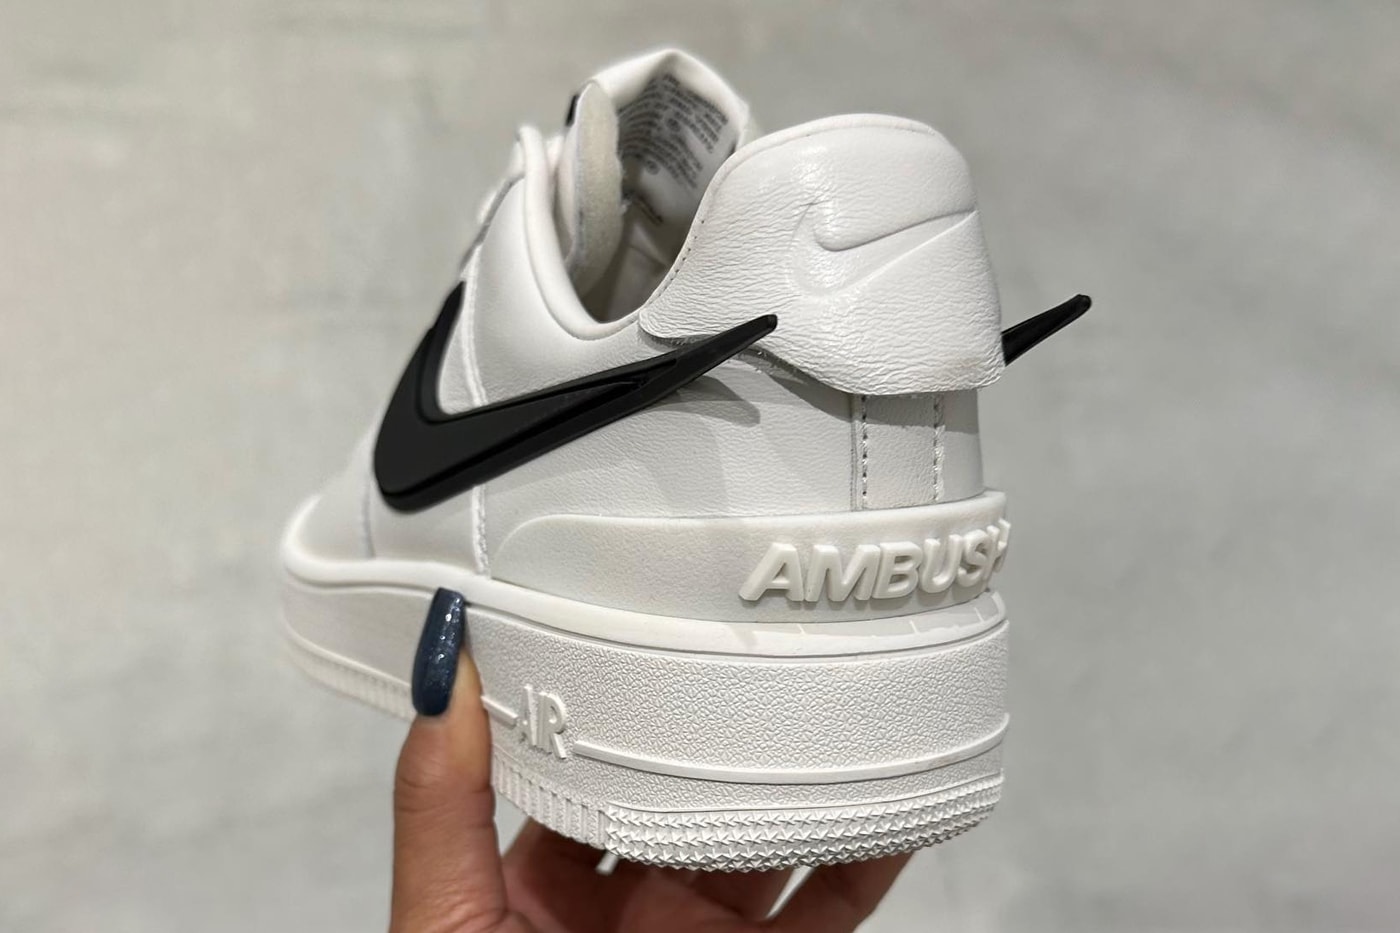 Yoon Ahn Ambush nike air force 1 low white black tailpipe swoosh leather release info date price